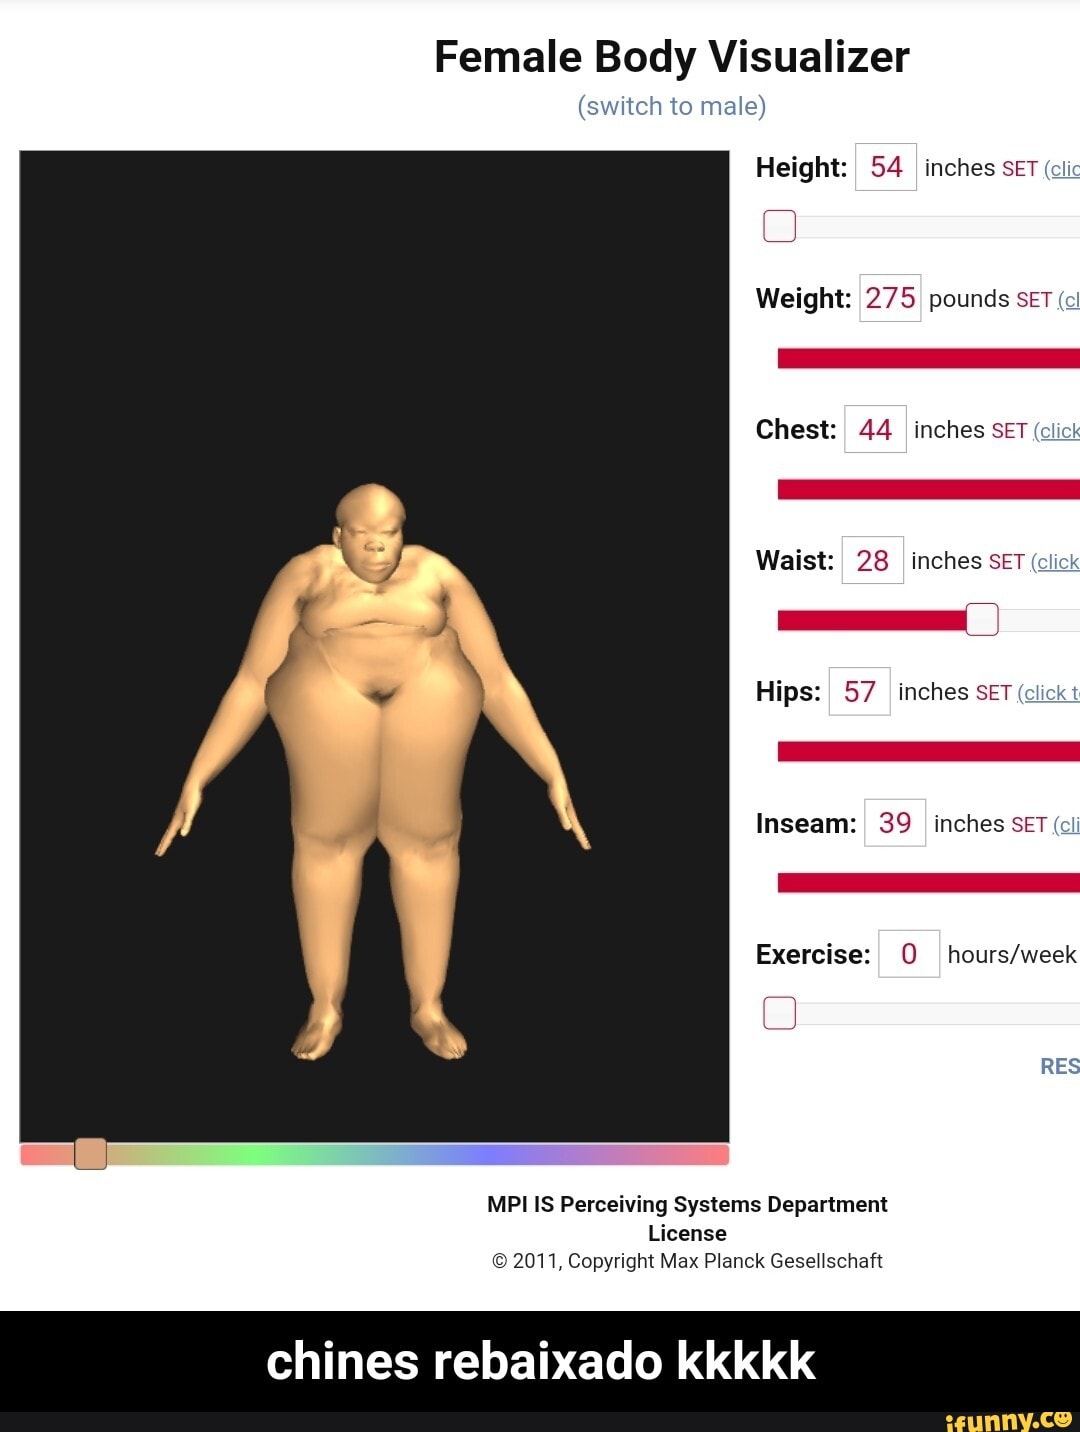 Extra THICC  Body Visualizer  Know Your Meme